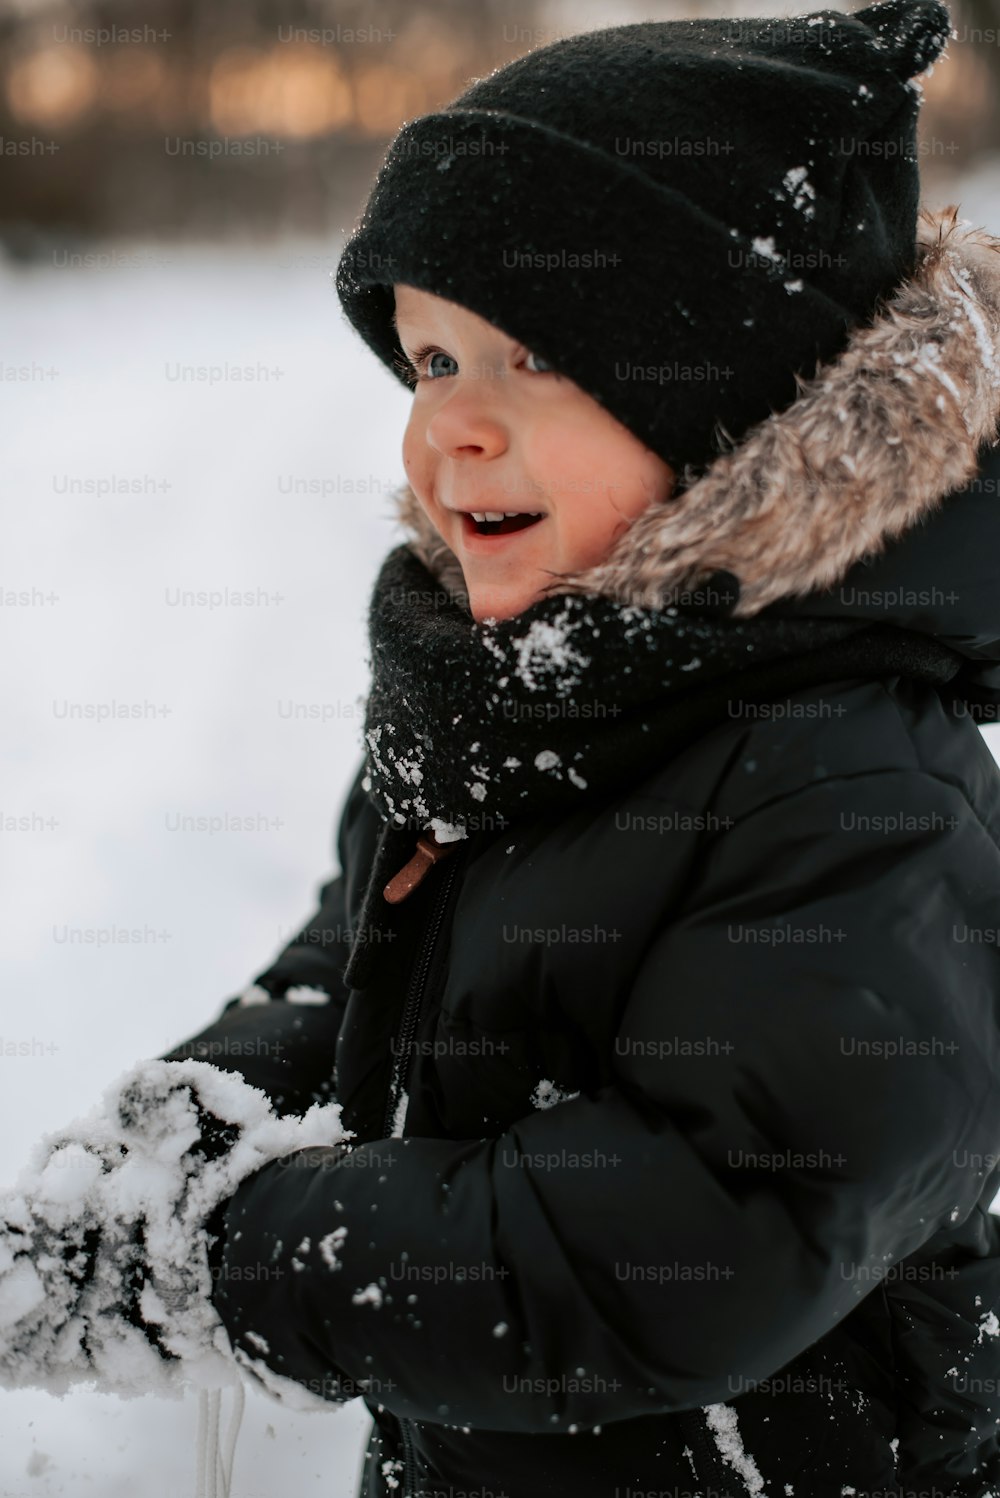 a young boy playing in the snow